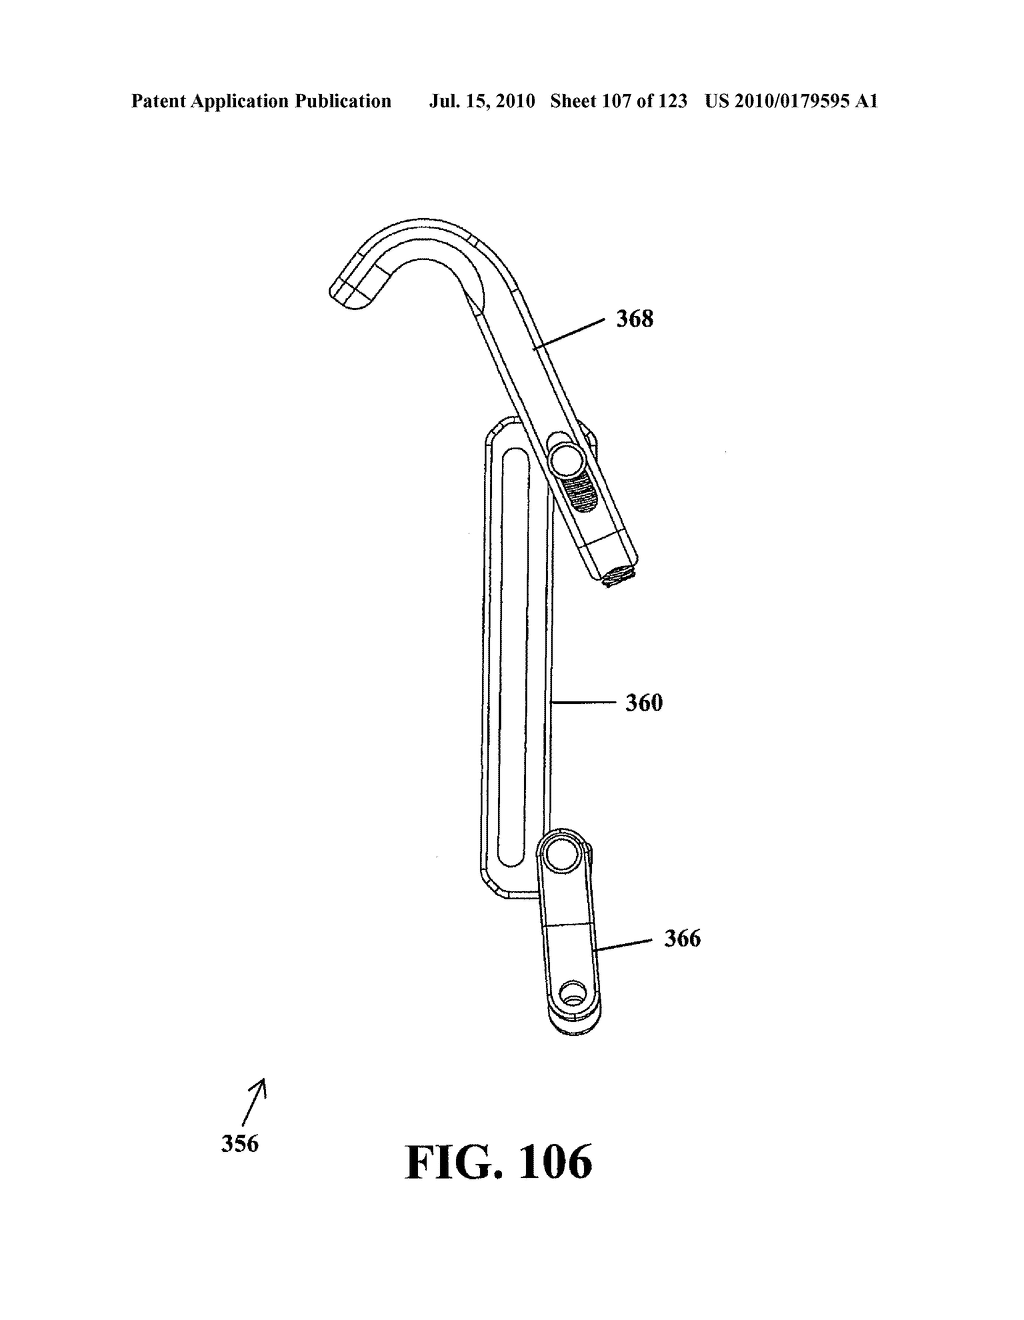 Intervertebral Implant Devices and Methods for Insertion Thereof - diagram, schematic, and image 108